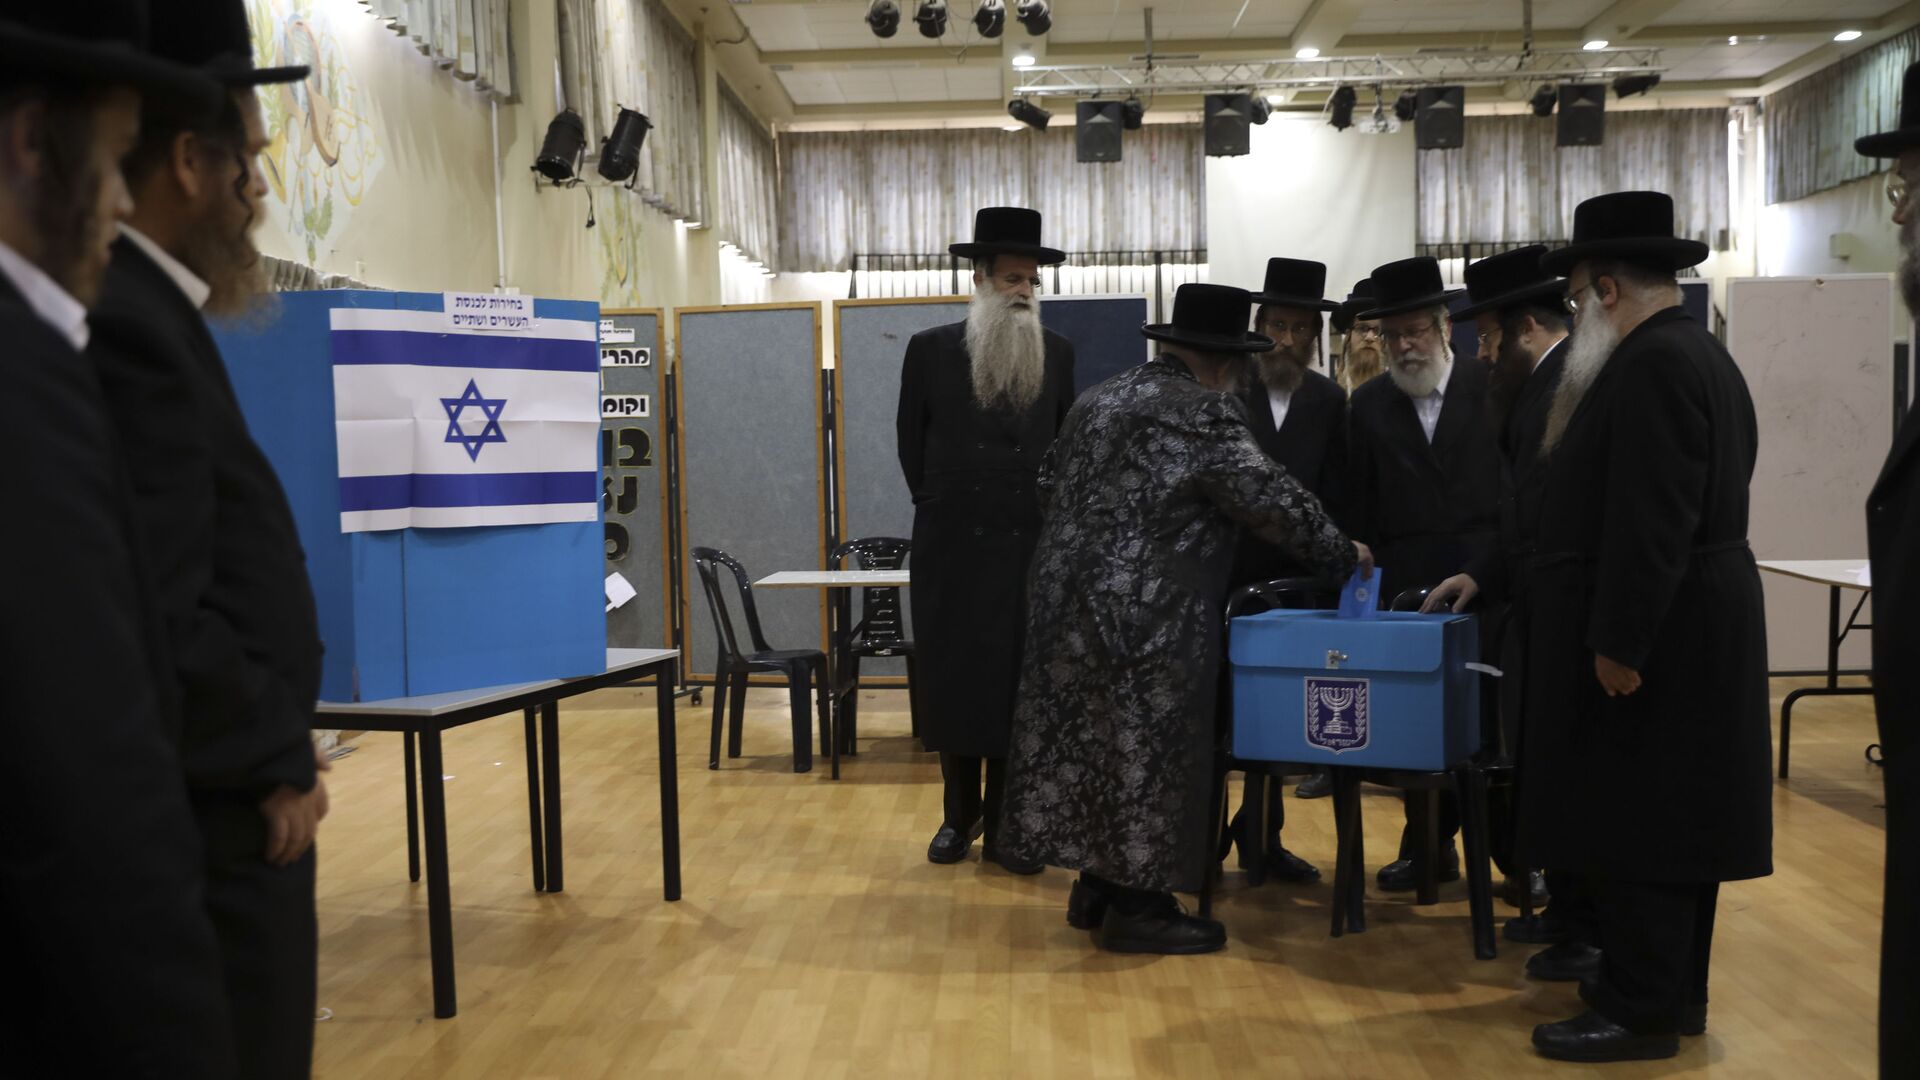 FILE - In this Tuesday, Sept. 17, 2019 file photo, ultra-Orthodox Jews watch Rabbi Israel Hager vote in Bnei Brak, Israel. Prime Minister Benjamin Netanyahu has called on his rival, Benny Gantz, to join a unity government, after unprecedented repeat elections returned a near tie between the two main parties. - Sputnik International, 1920, 23.02.2022